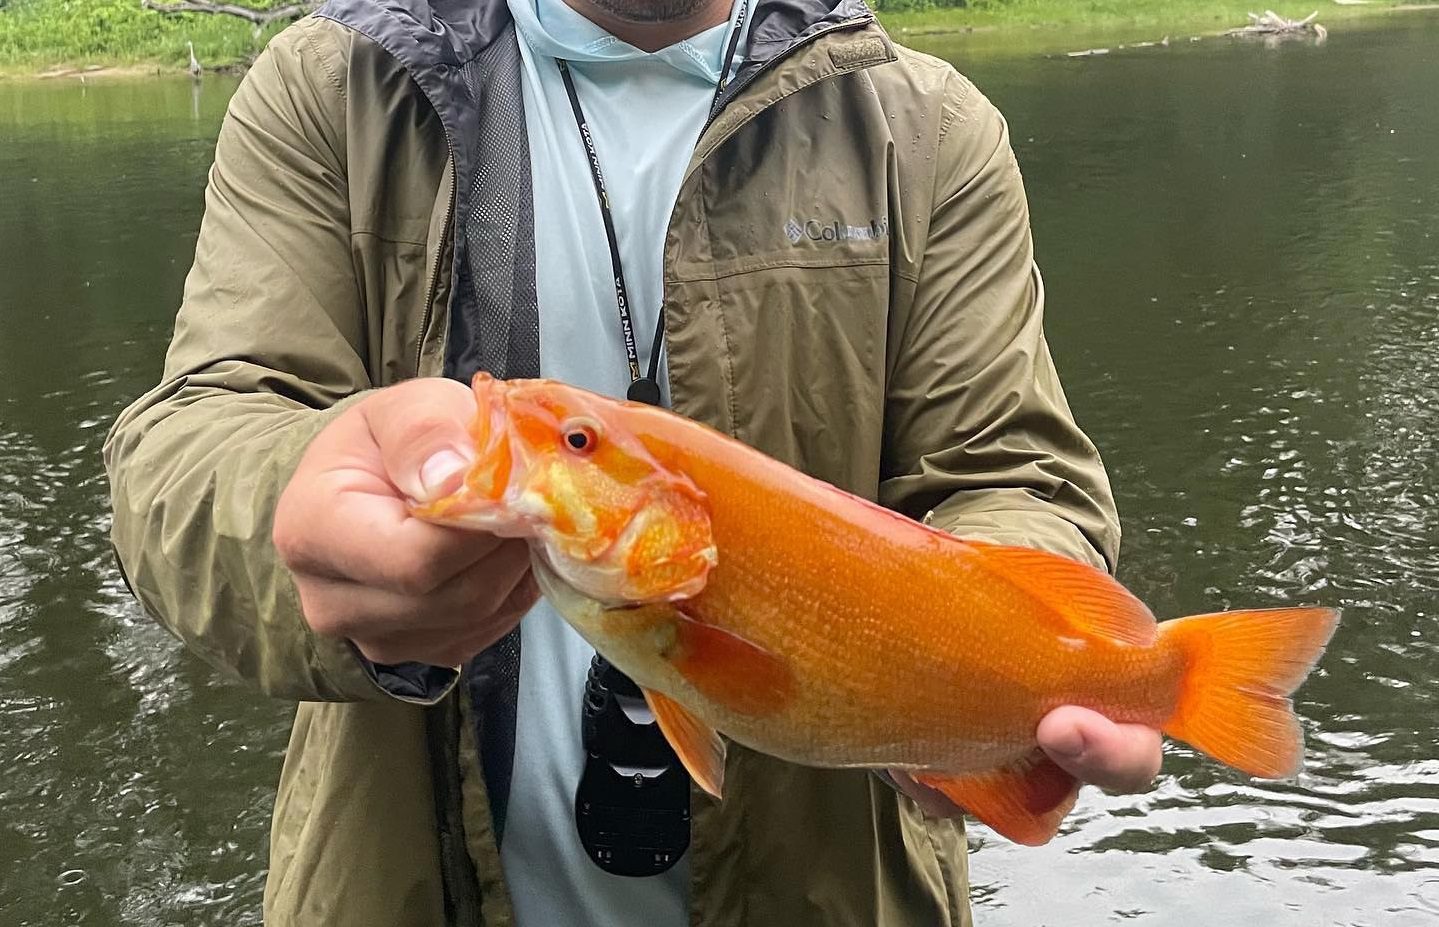 Indiana Fisherman Reels In Insanely Rare Neon Orange Smallmouth Bass - Whiskey Riff